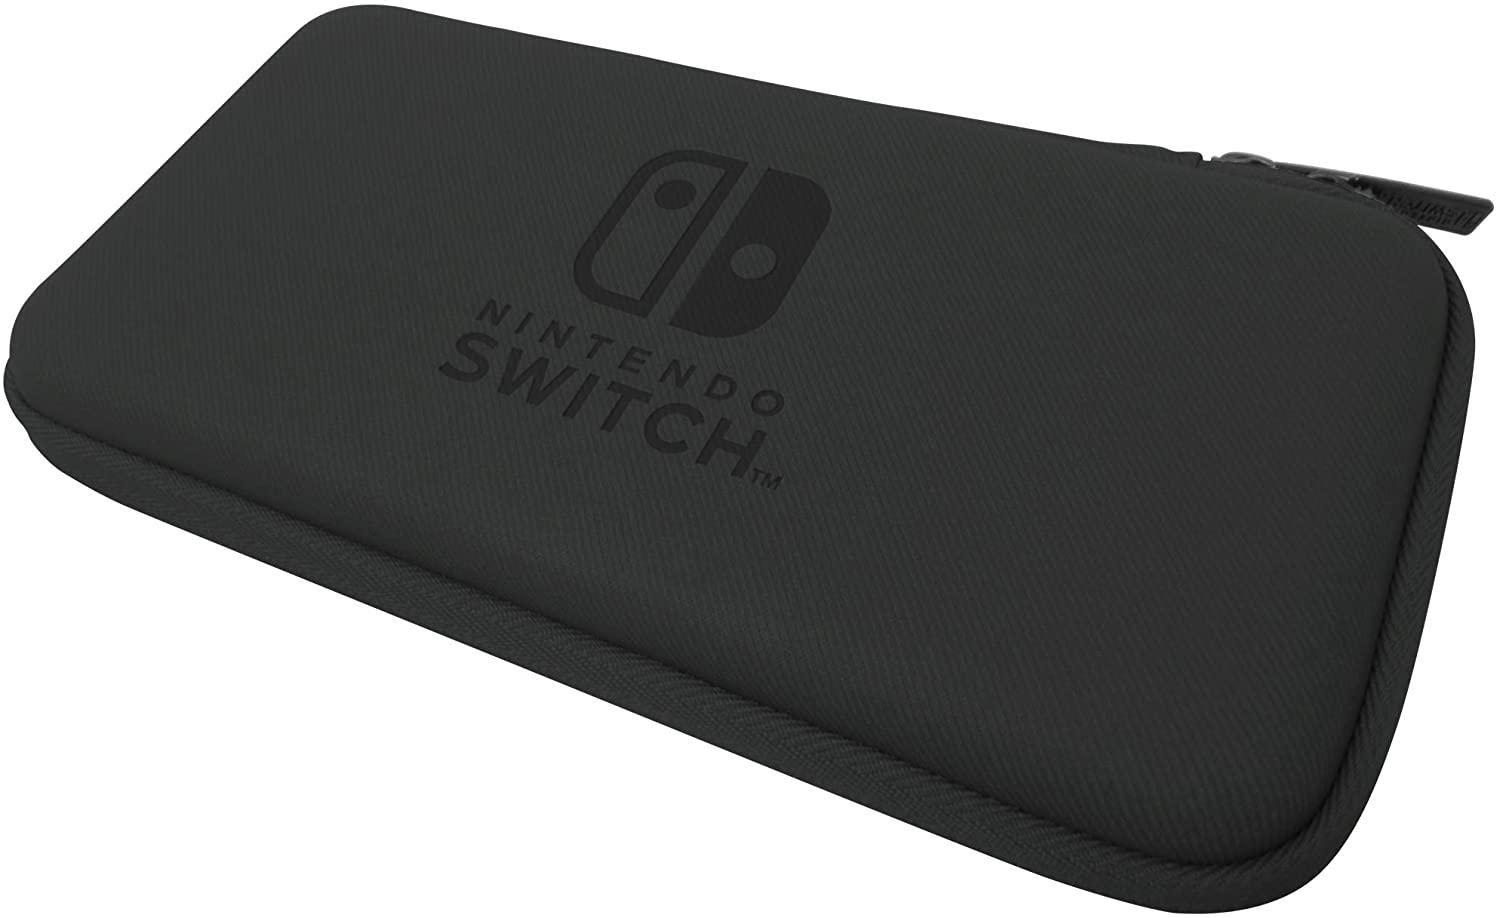 Nintendo Switch Tough Pouch Protective Carrying Case with Game Card Storage - GameStore.mt | Powered by Flutisat